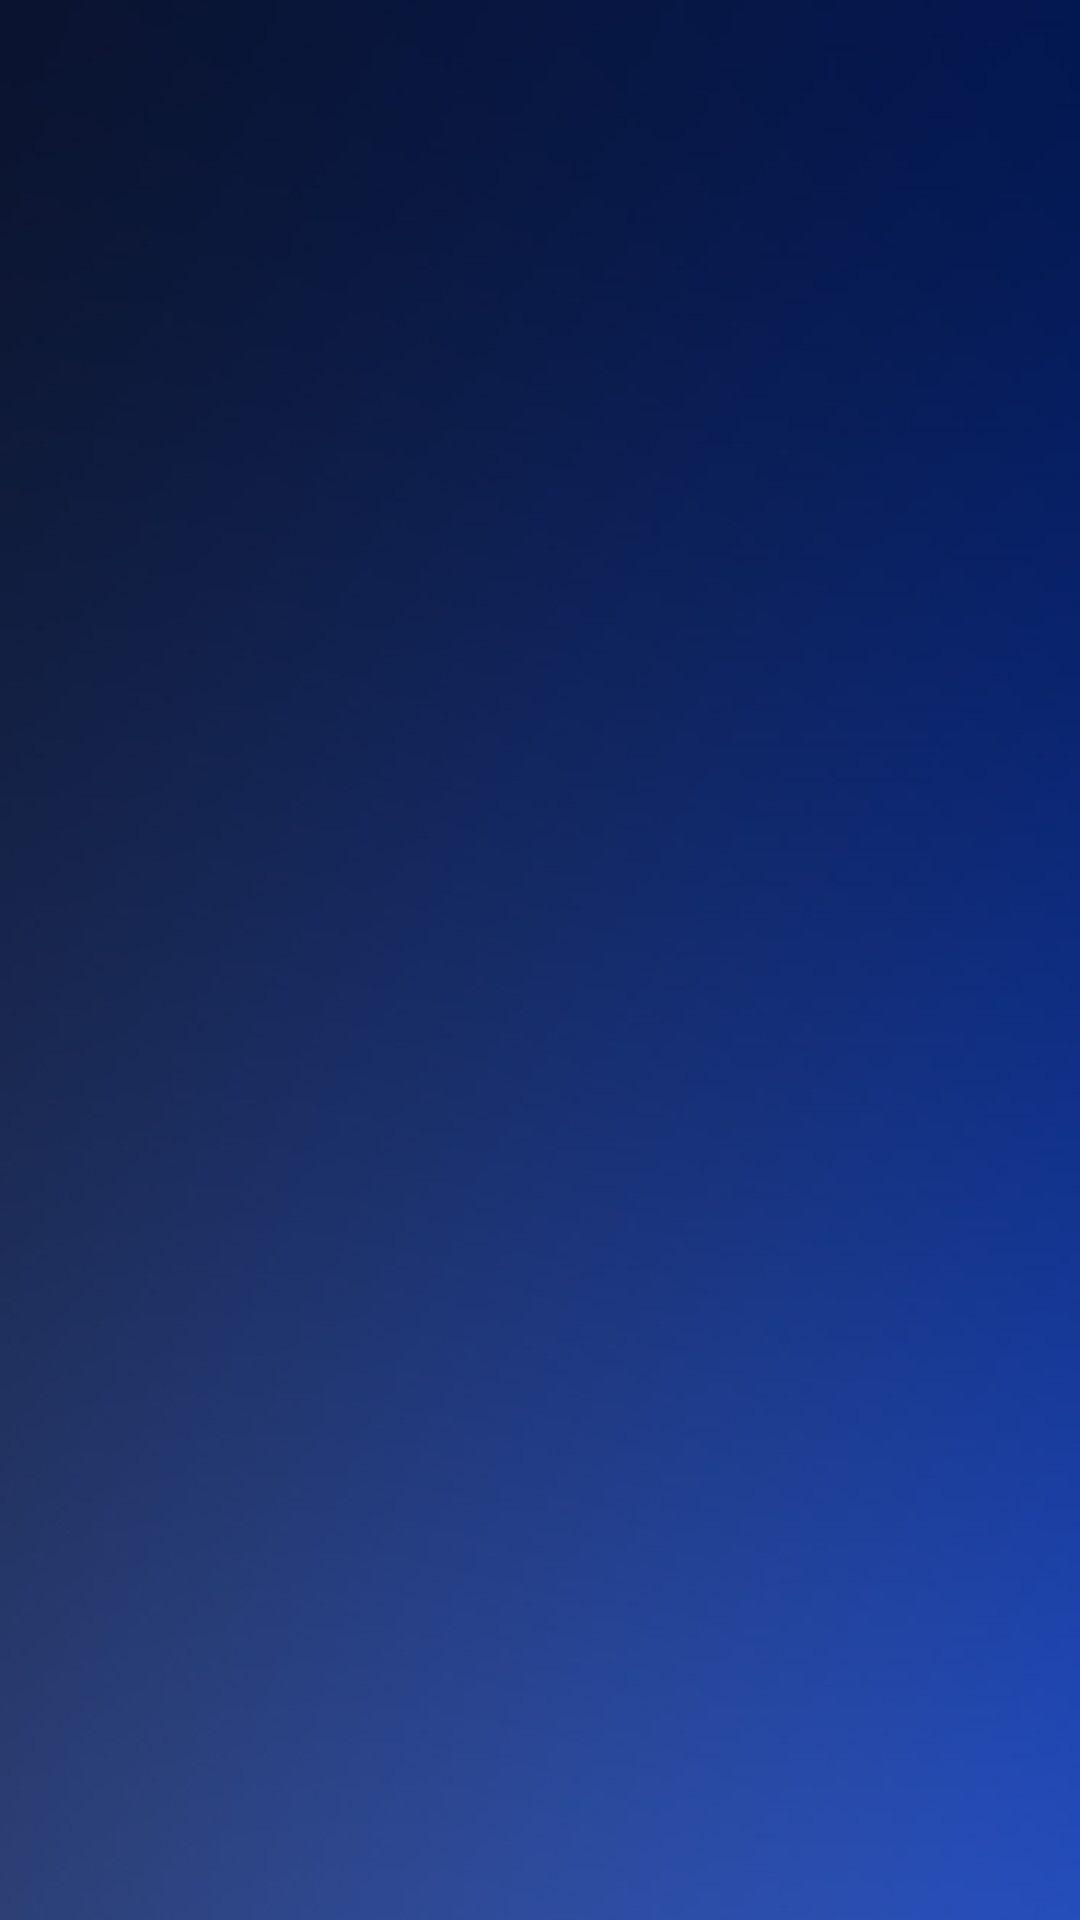 1080 x 1920 · jpeg - Midnight Blue Wallpapers - Top Free Midnight Blue Backgrounds ...